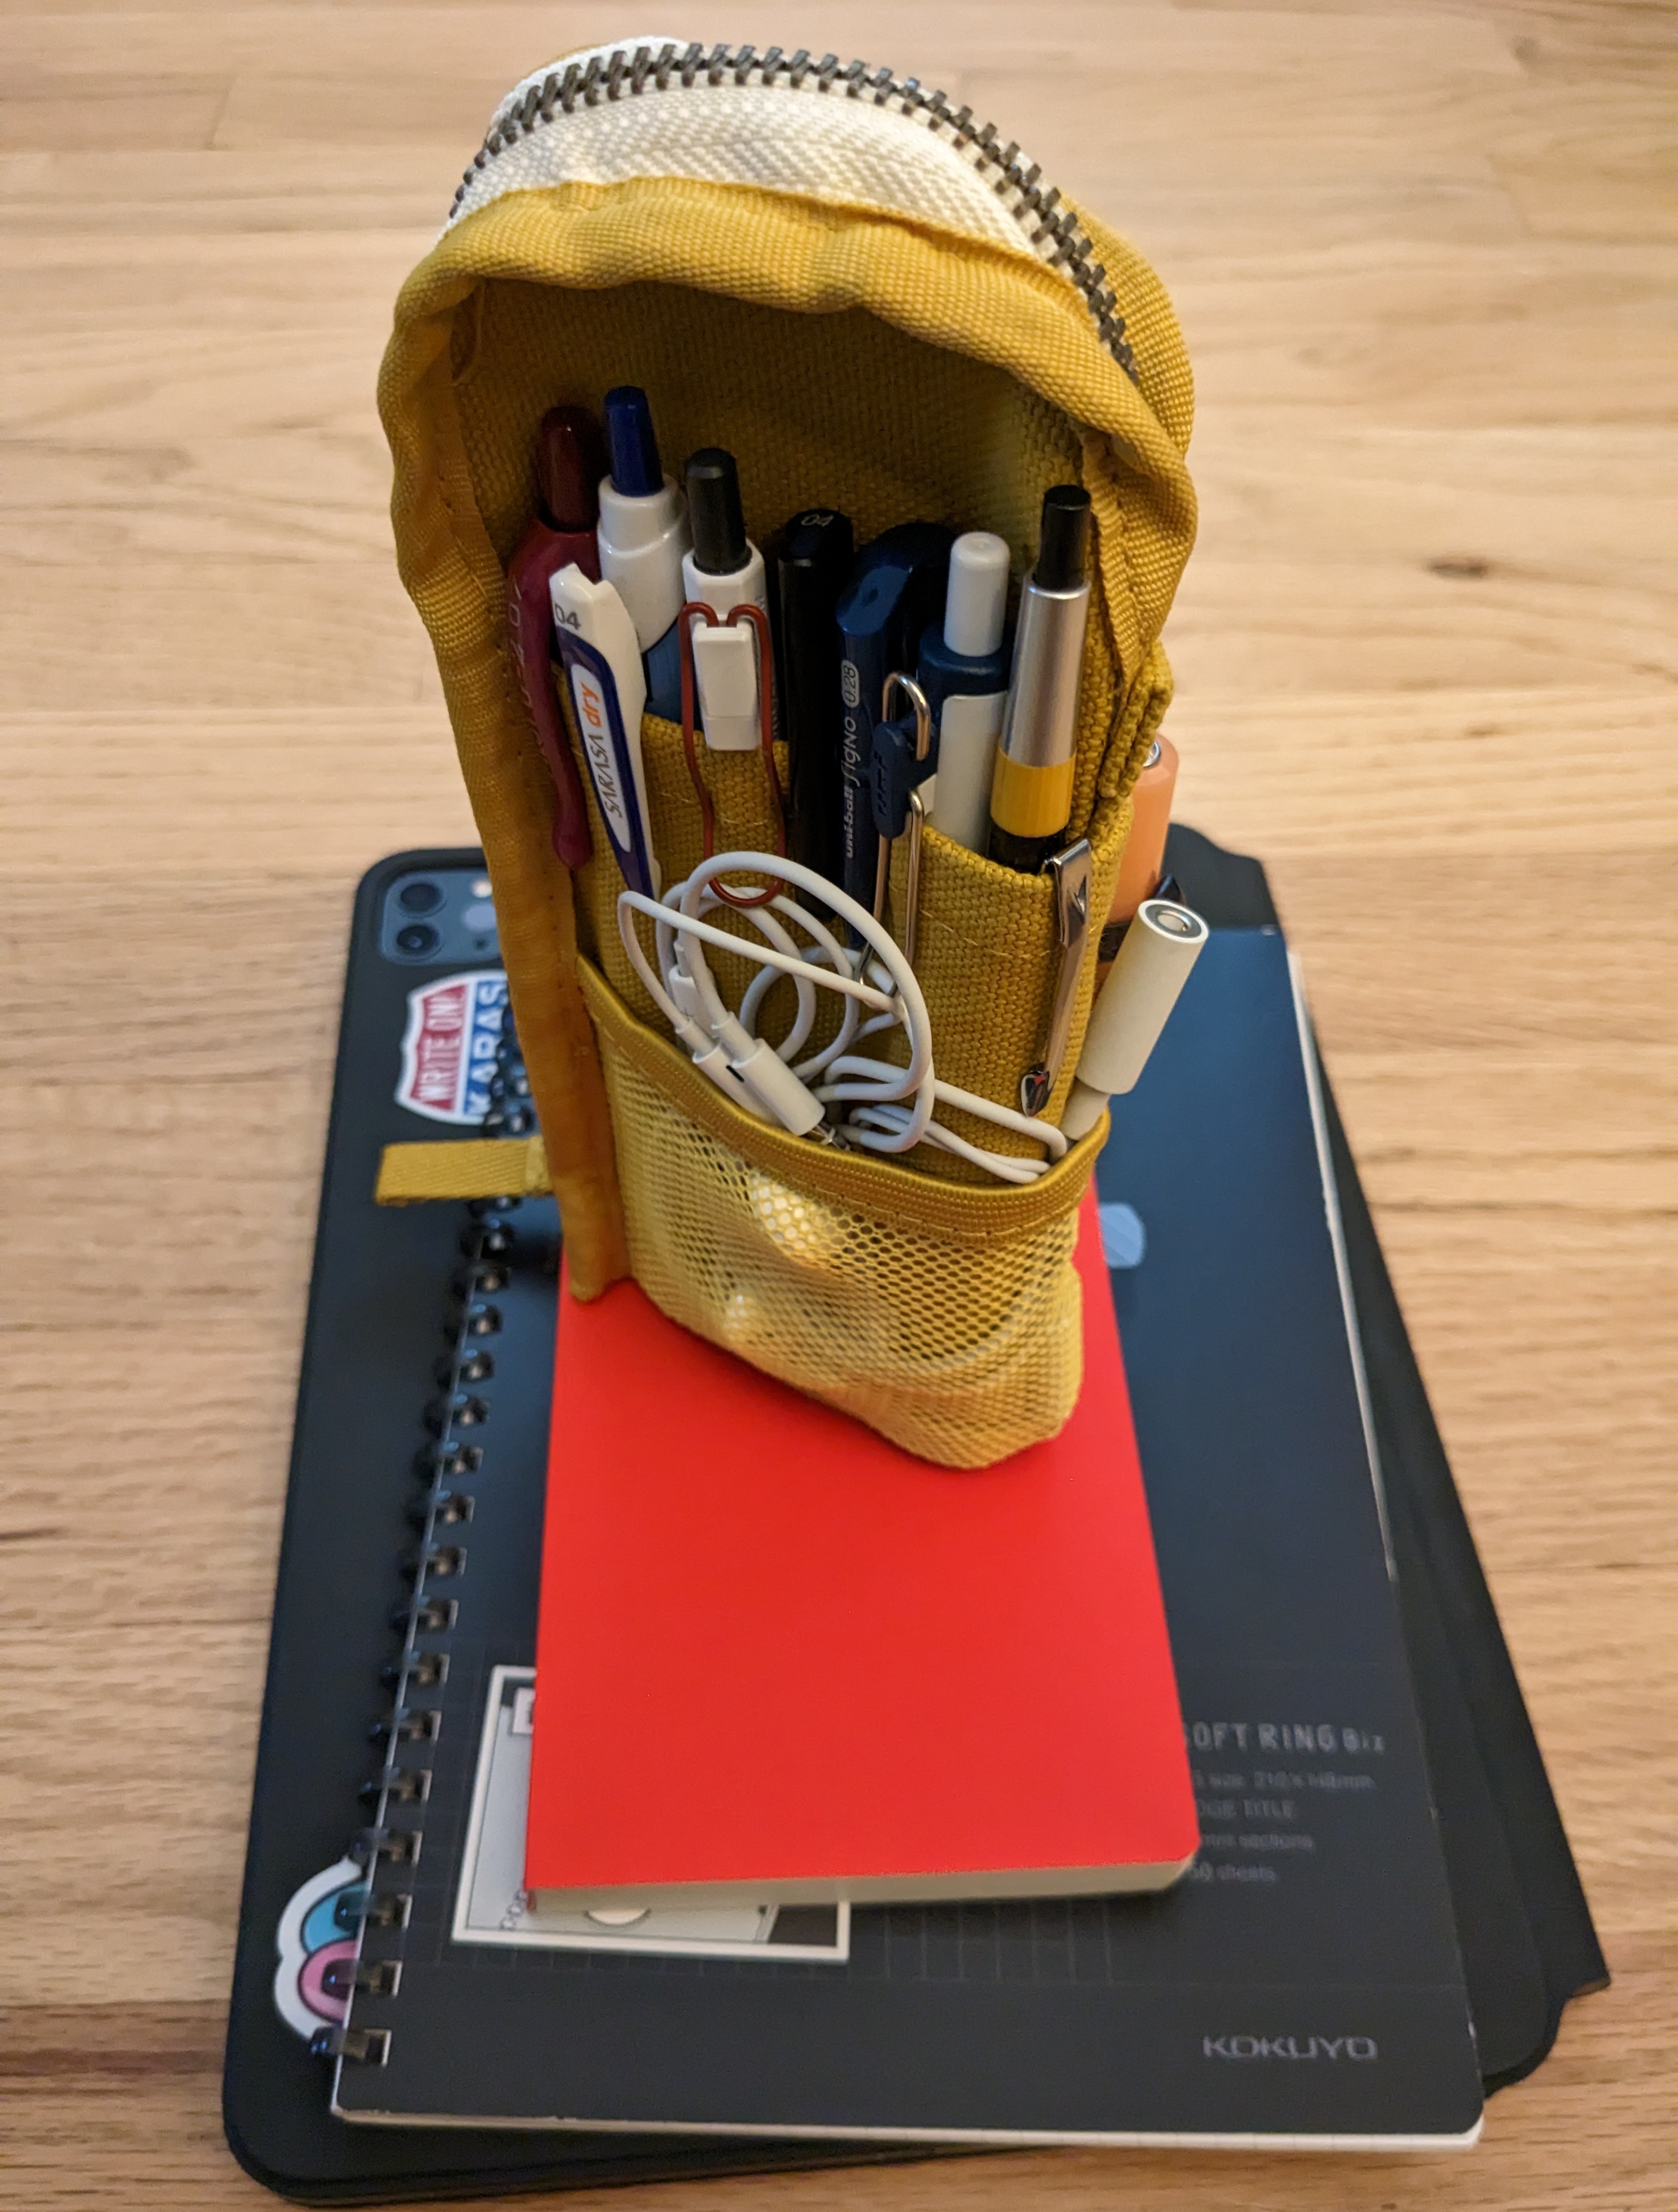 Hinemo Wide Open Pen Pouch Review — The Pen Addict